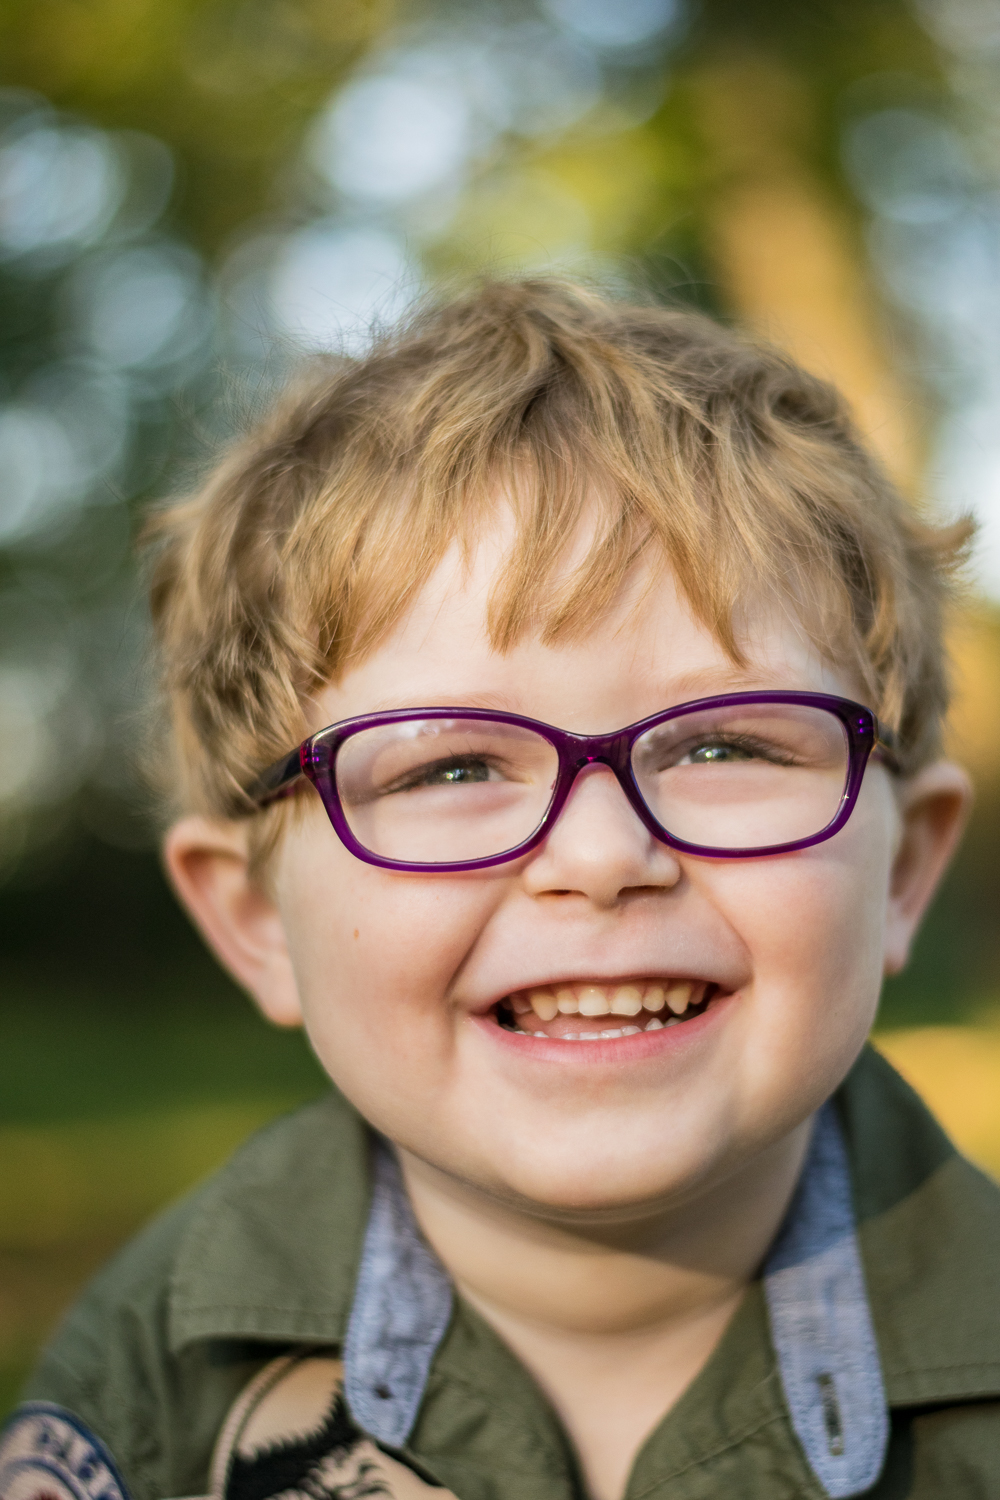 A close-up of a young boy with glasses laughing in the woods.